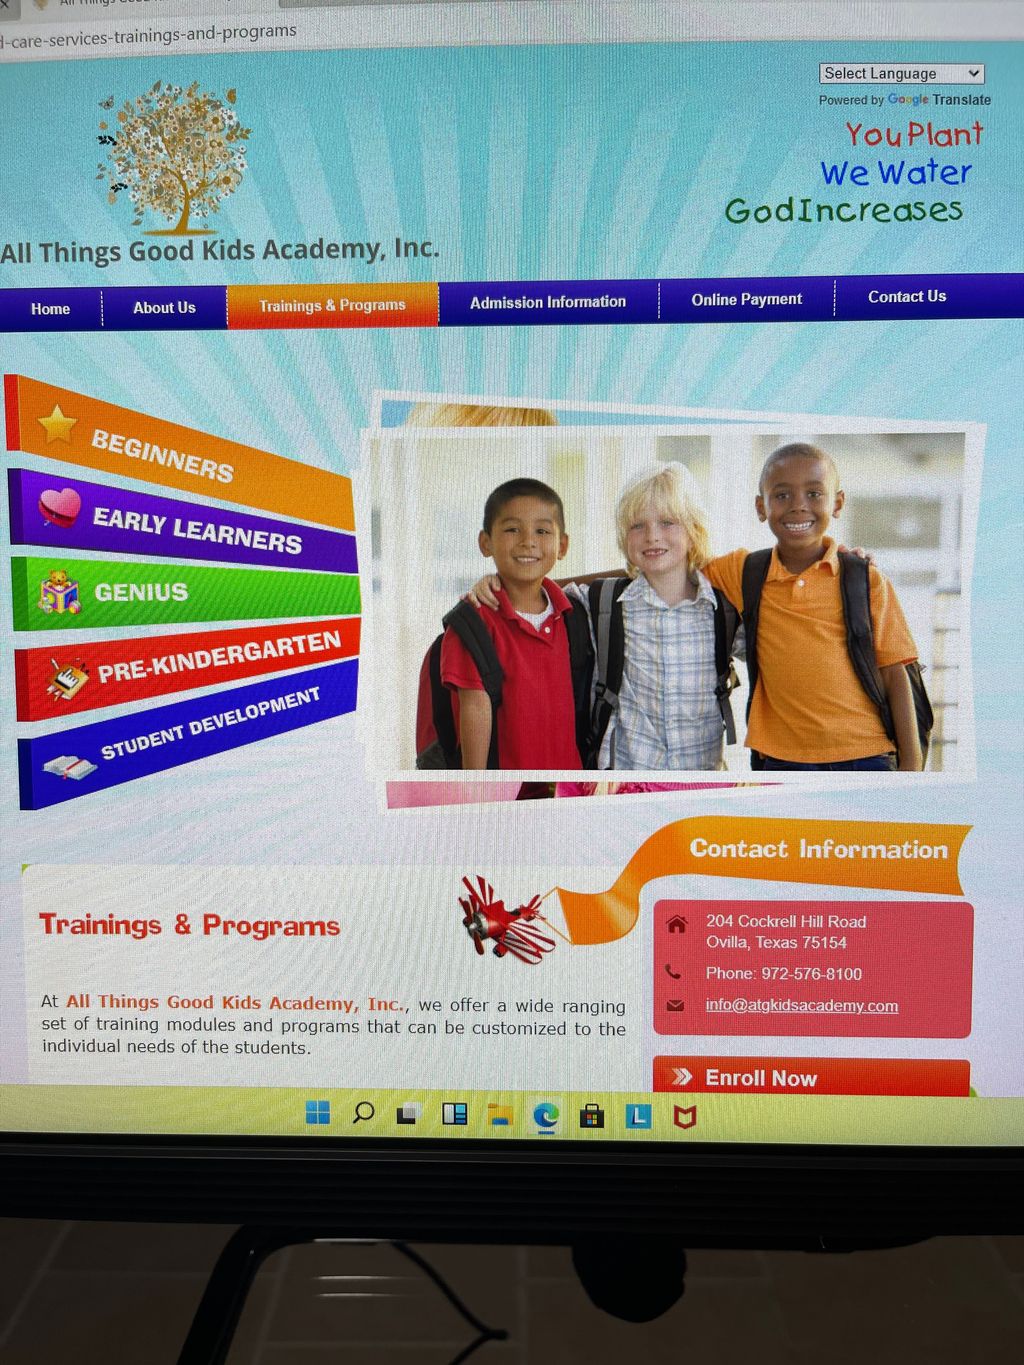 All Things Good Kids Academy